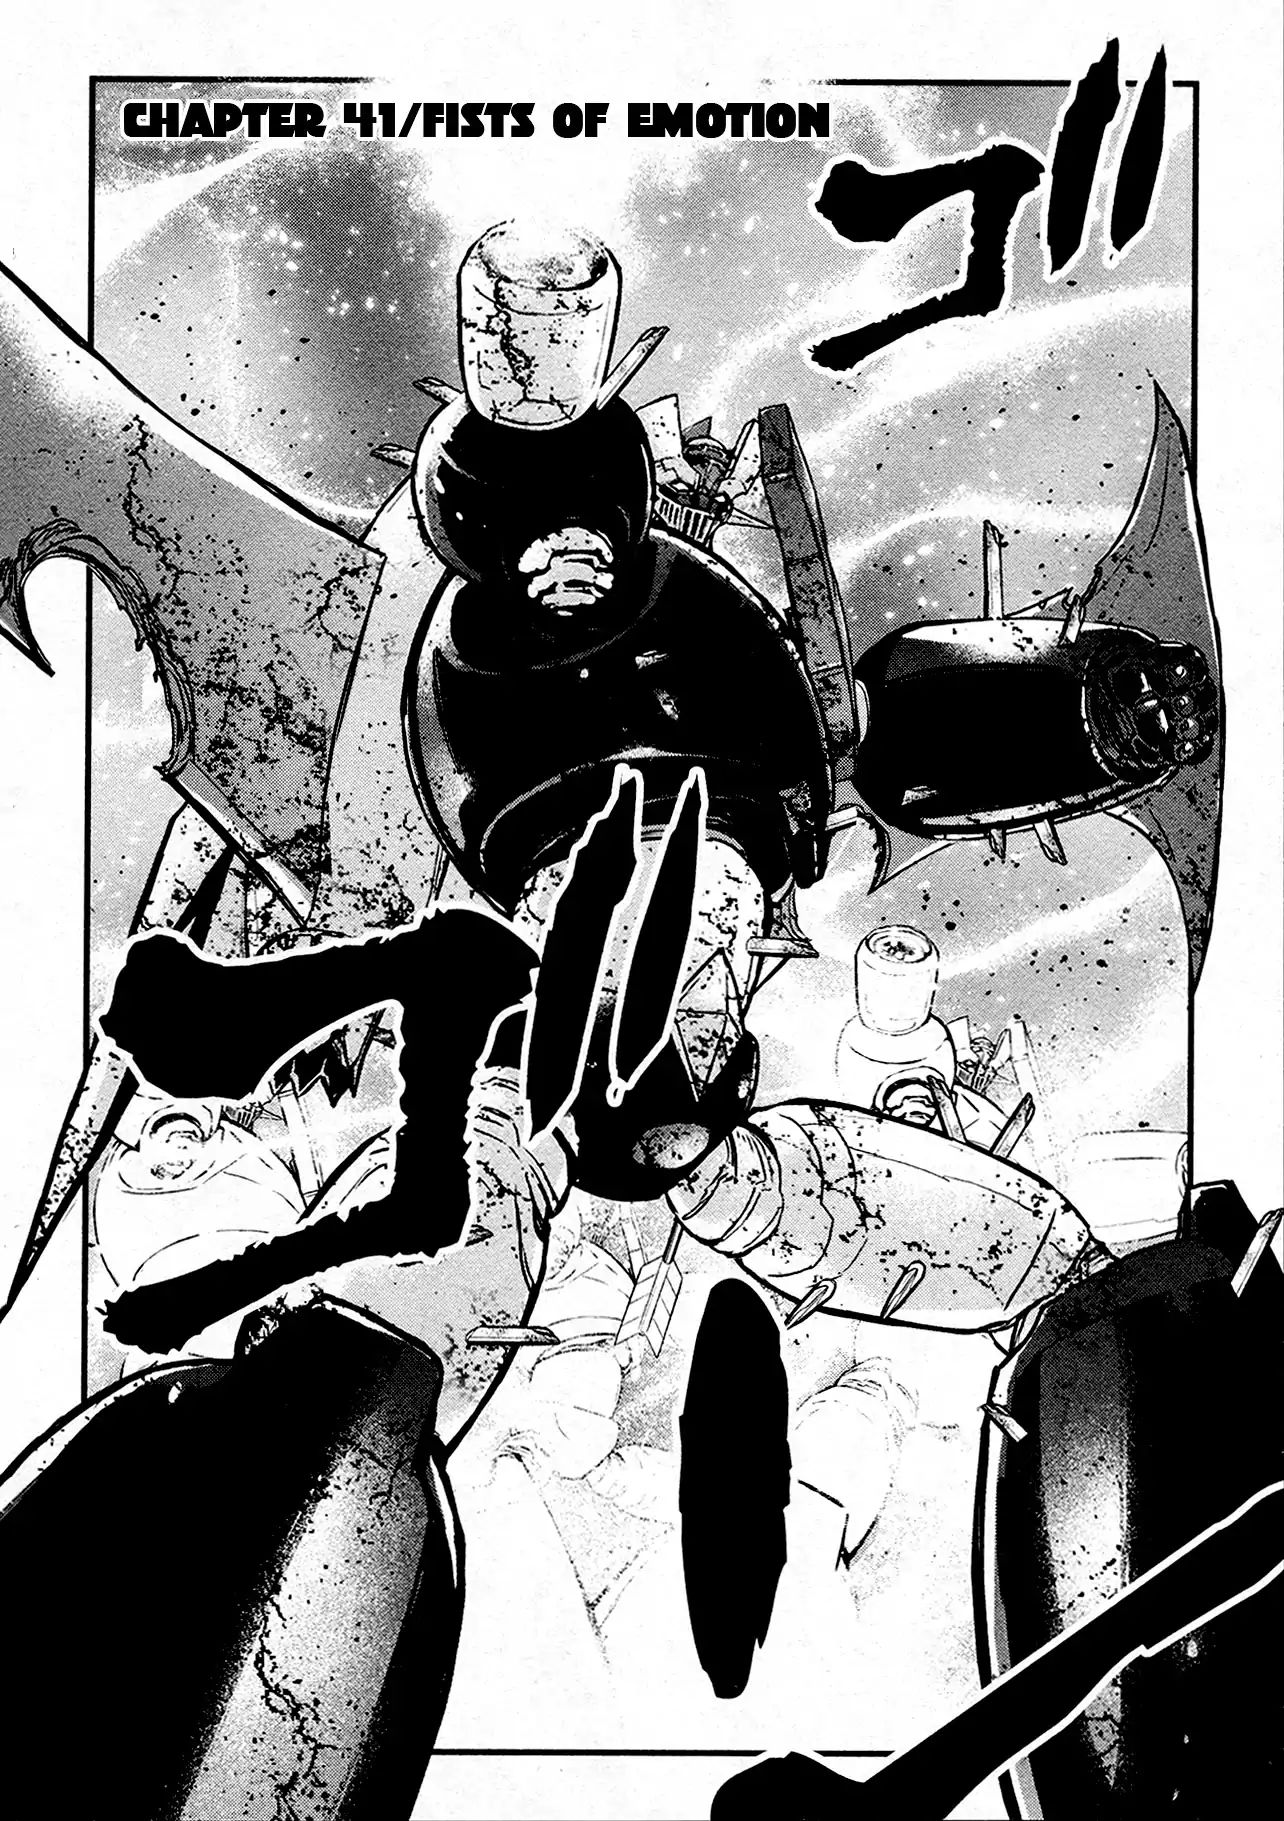 Shin Mazinger Zero Vol.9 Chapter 41: Fists Of Emotion - Picture 1